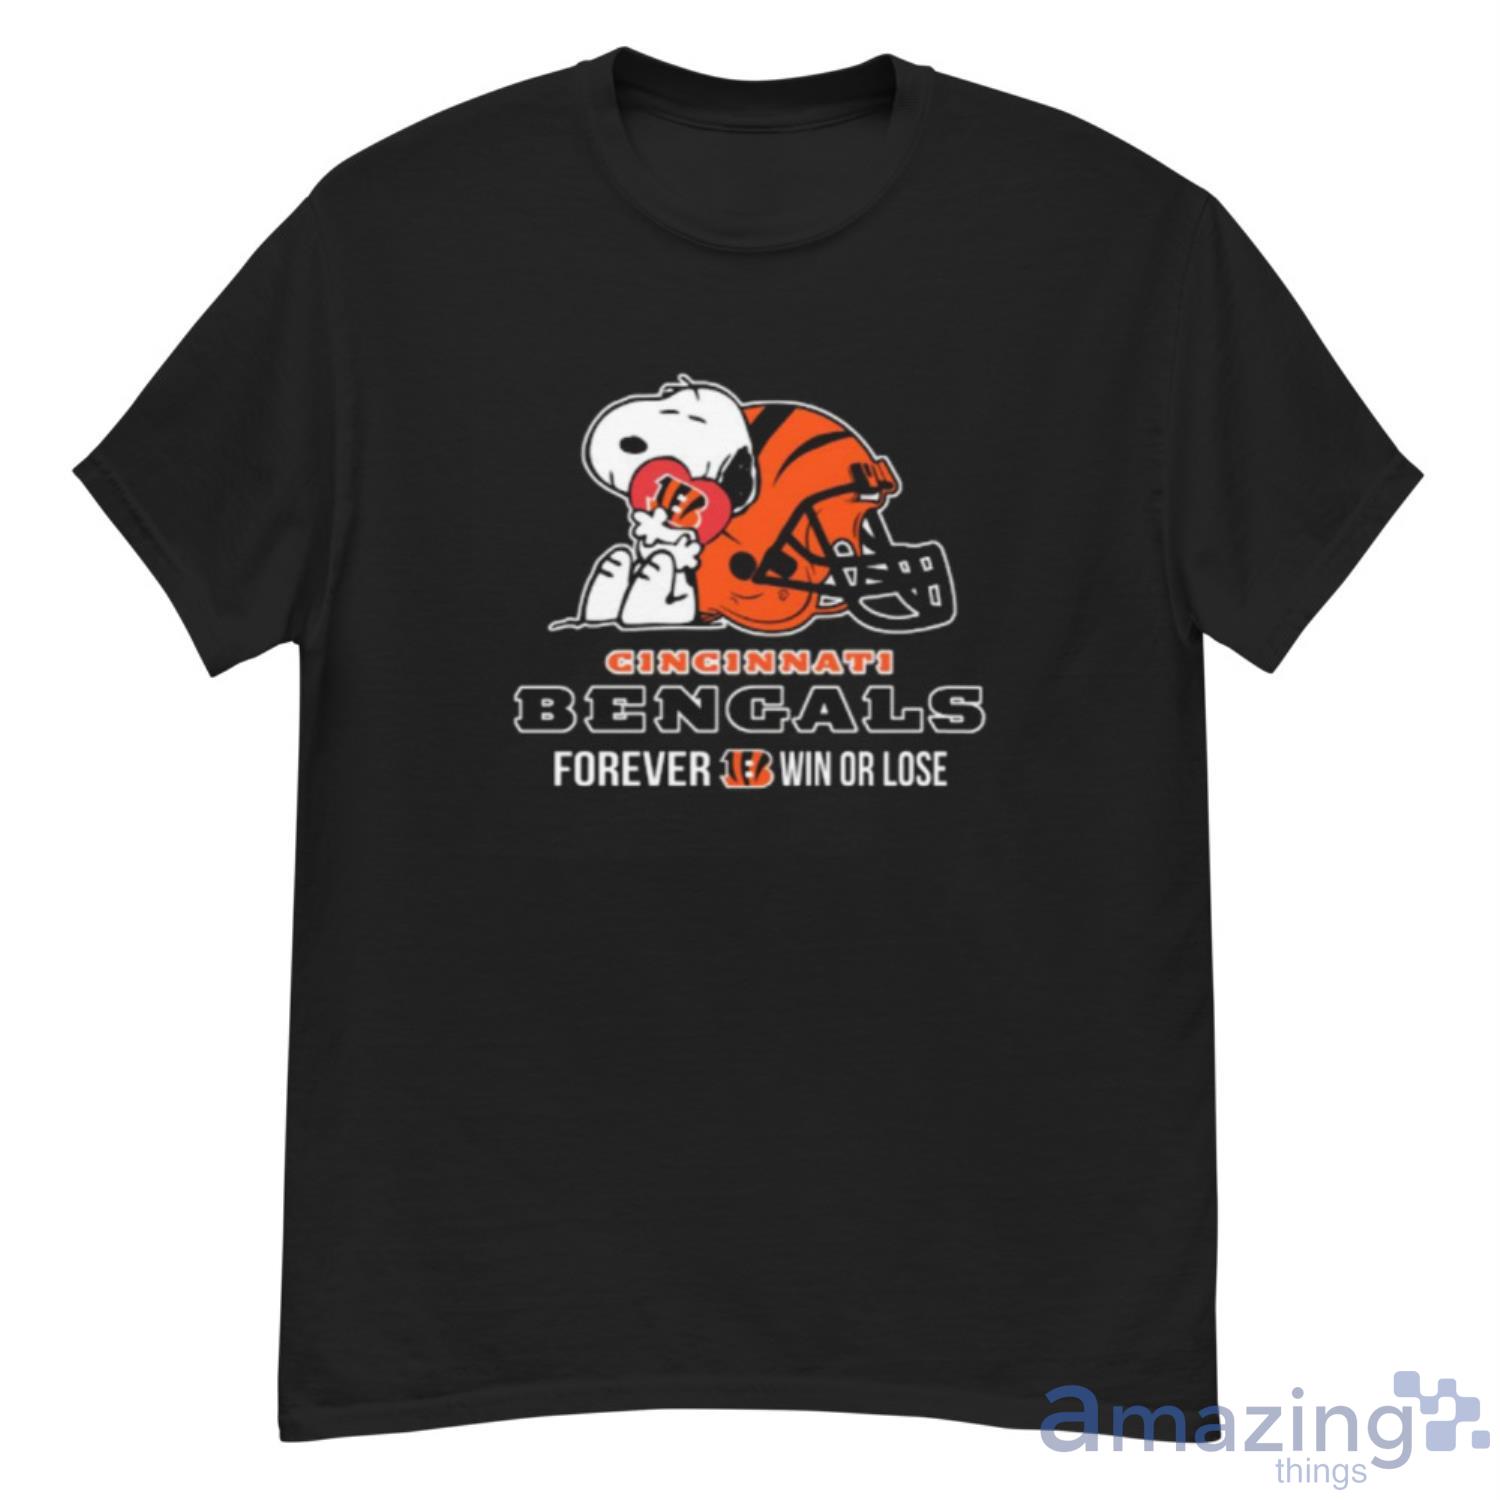 NFL The Peanuts Movie Snoopy Forever Win Or Lose Football Cincinnati Bengals Shirt - G500 Men’s Classic T-Shirt